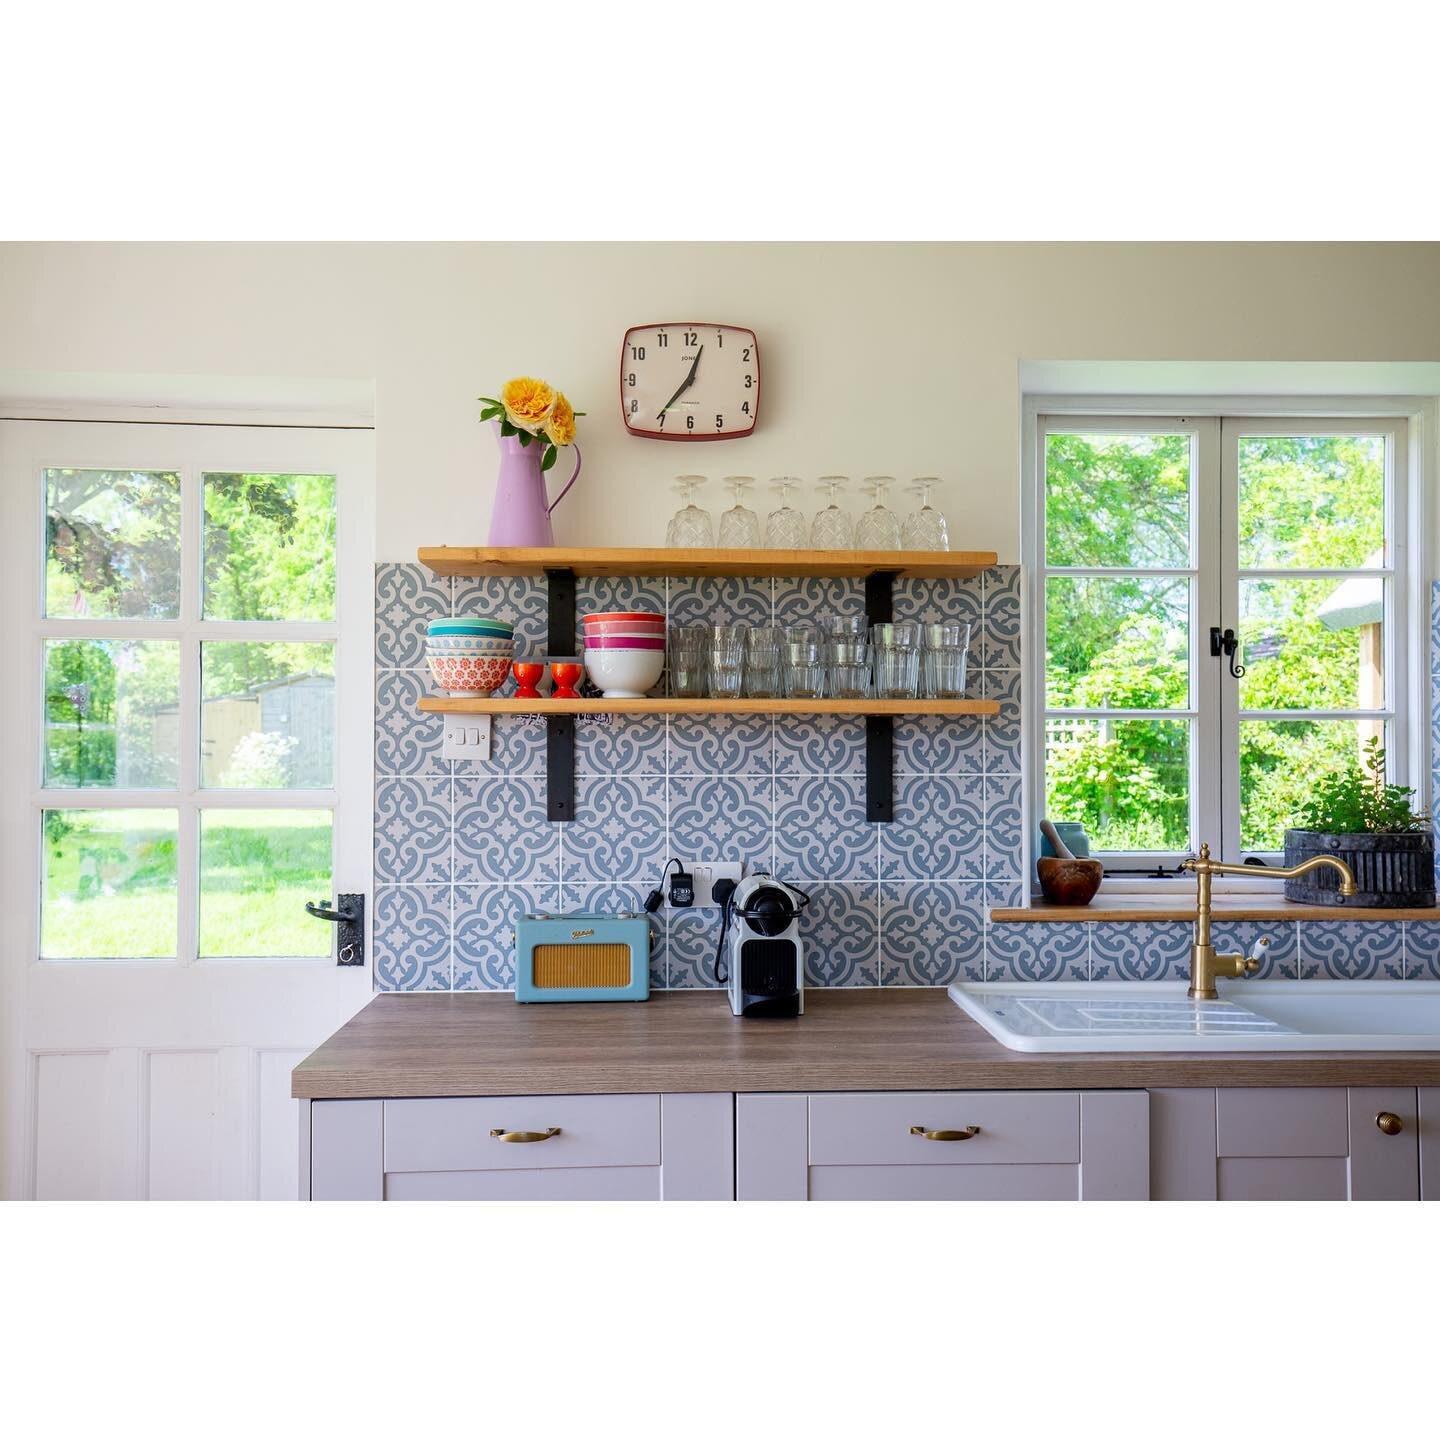 It's a retro feeling Friday kind of day.  Love the colour and retro vibes in this kitchen space.  #comeonengland #retrofriday #interiorsphotographer #interiorsphotography #interiordesign #retrovibes #kitcheninspo #kitcheninteriors #aceinyourspacephot